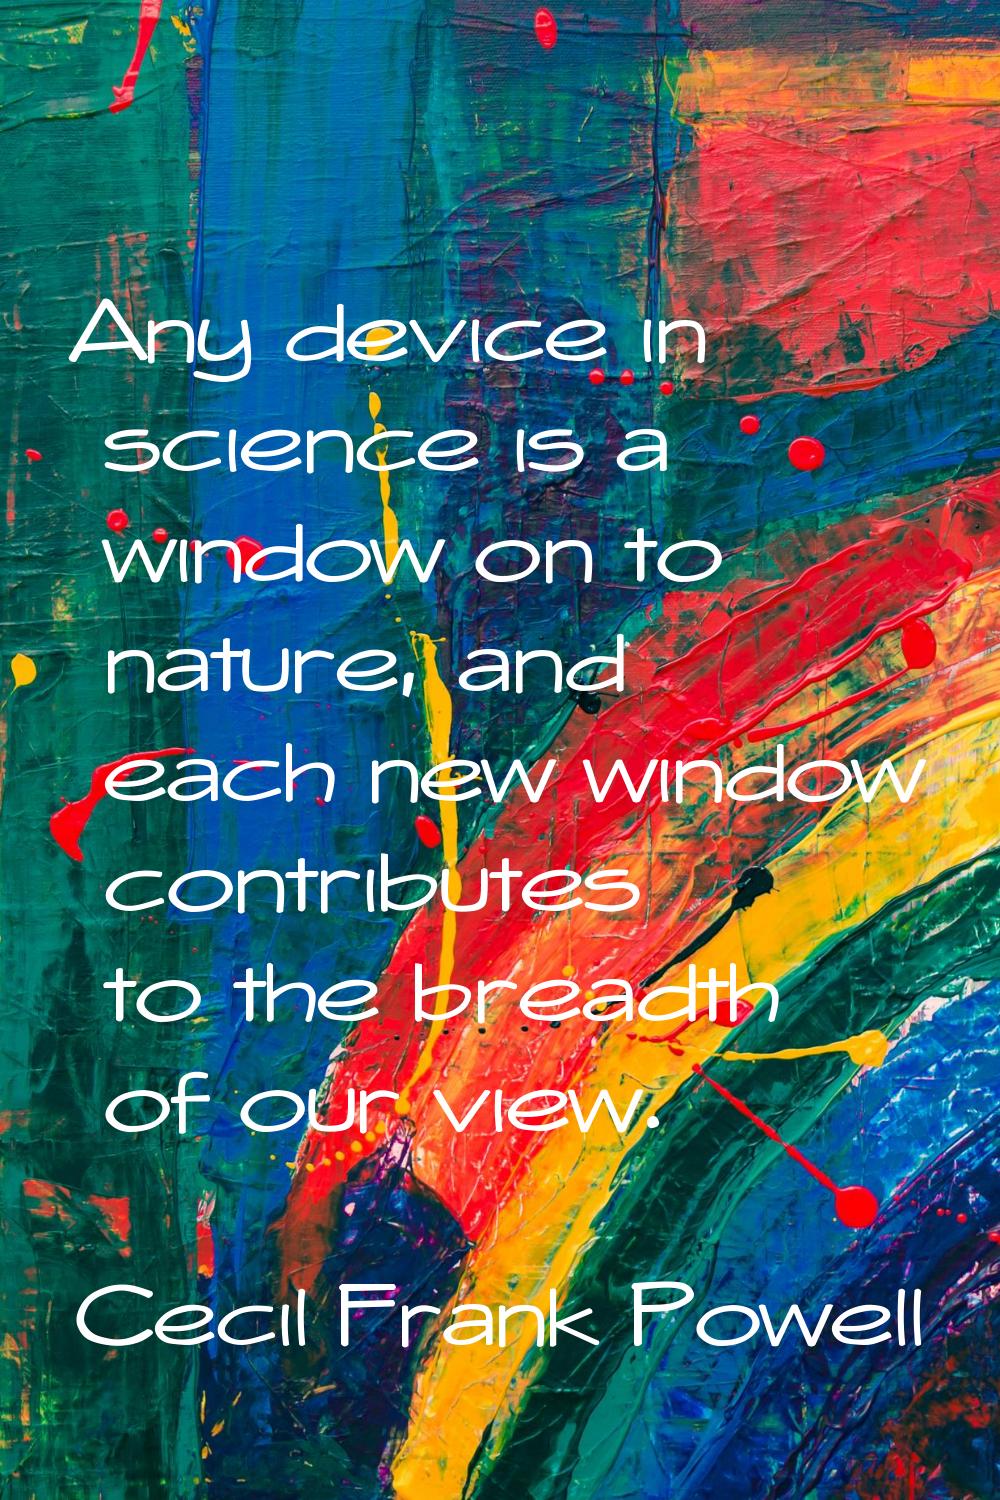 Any device in science is a window on to nature, and each new window contributes to the breadth of o